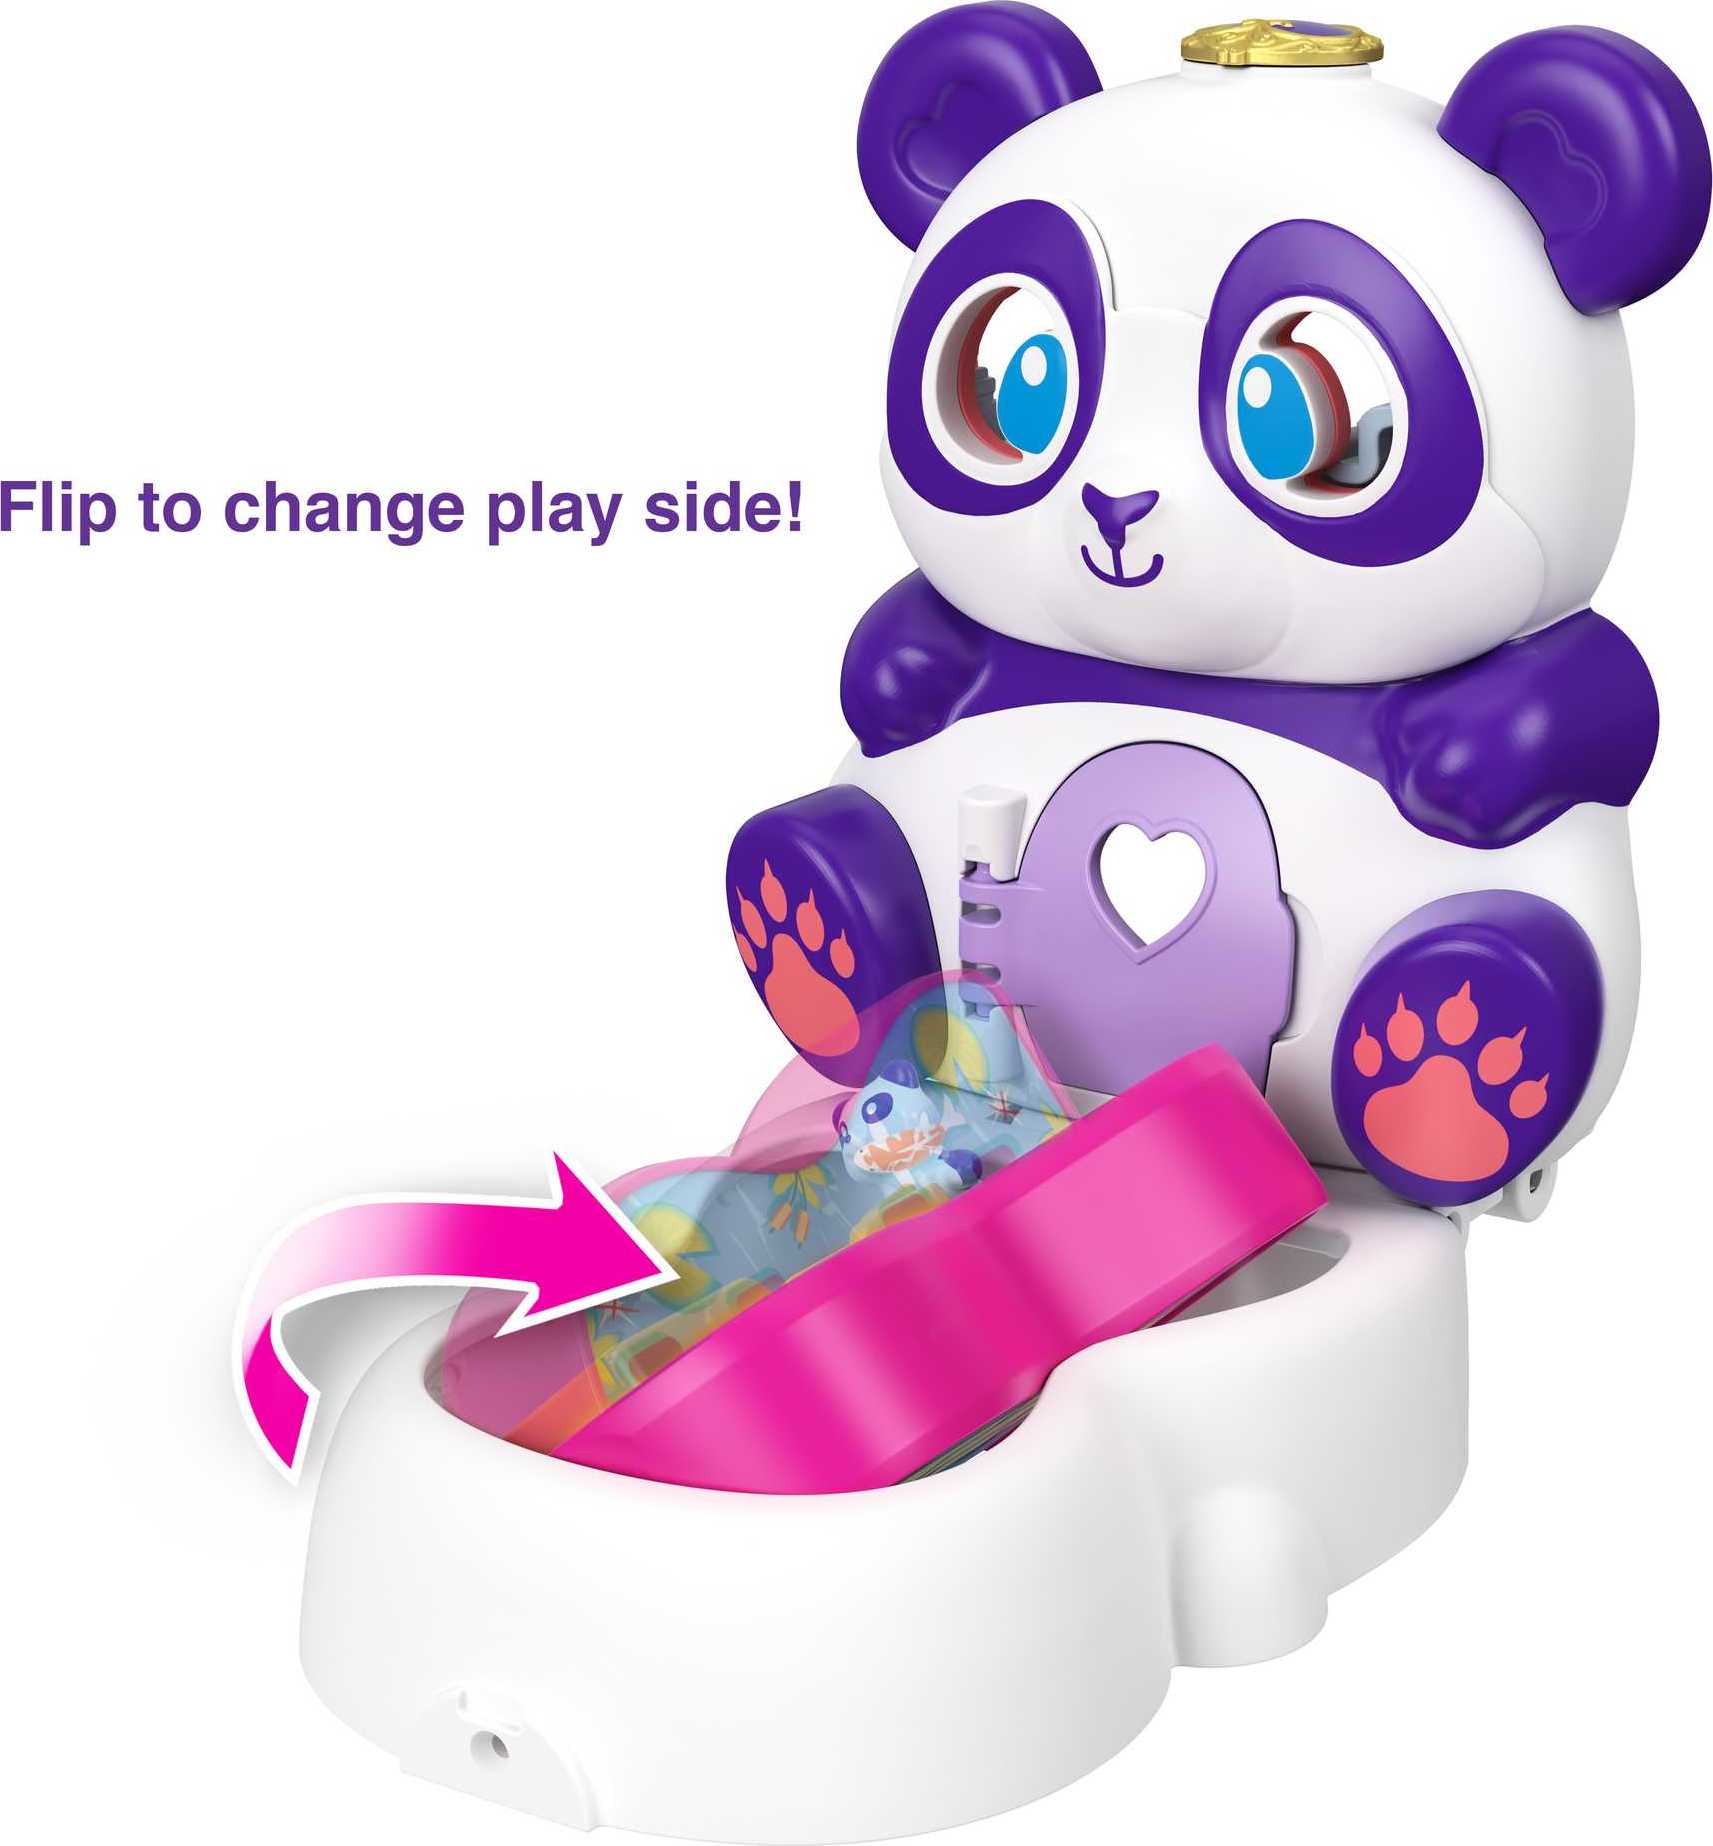 Polly Pocket Flip & Find Panda Compact, Micro Doll, Pet & Accessories, Travel Toy with Flip Bottom - image 3 of 7